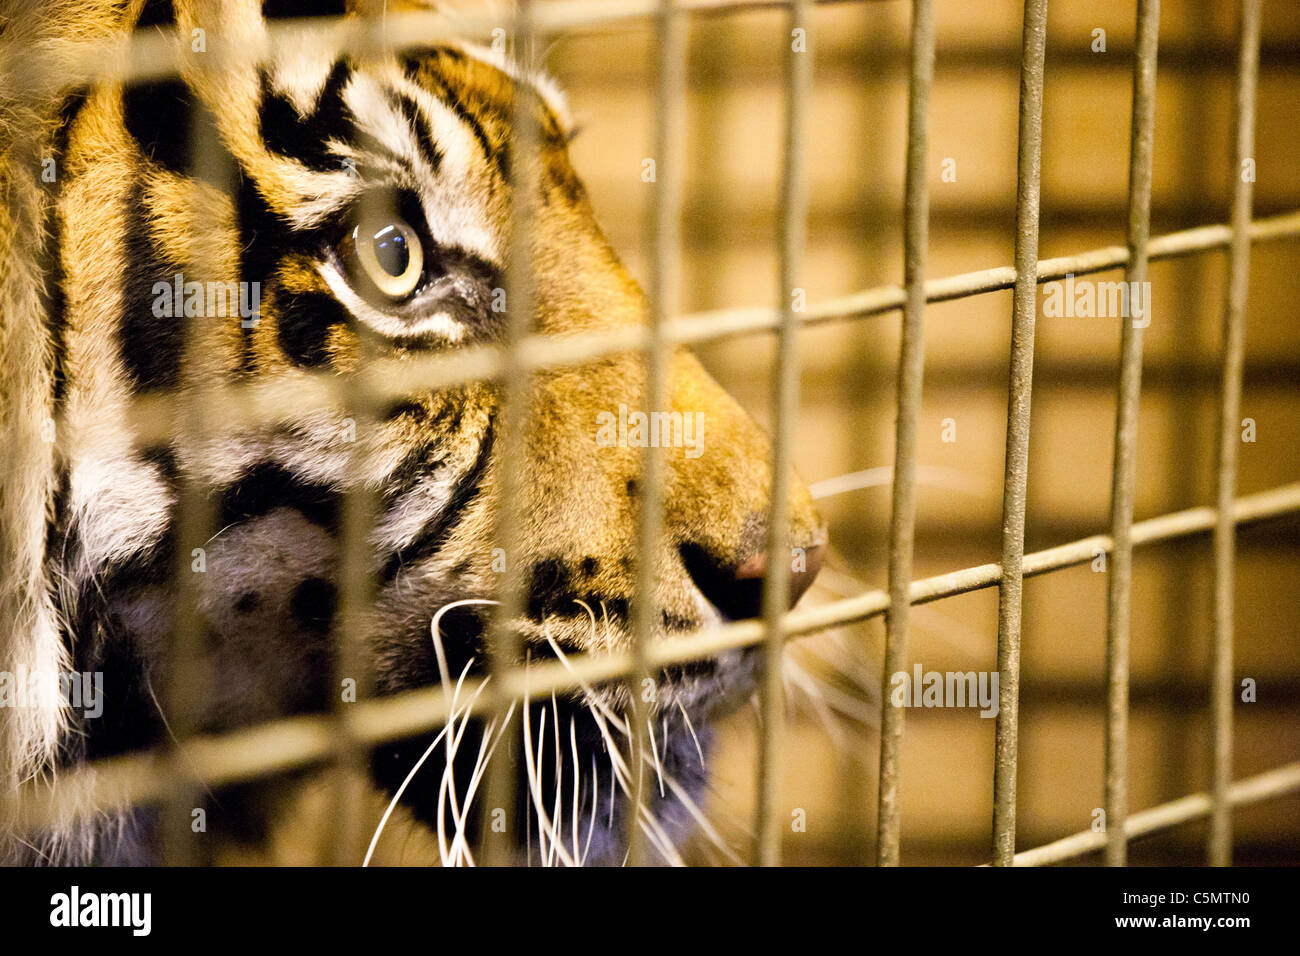 LONDON One of ZSL's two Sumatran tigers (Panthera tigris) watches from behind the scenes at London Zoo. Stock Photo